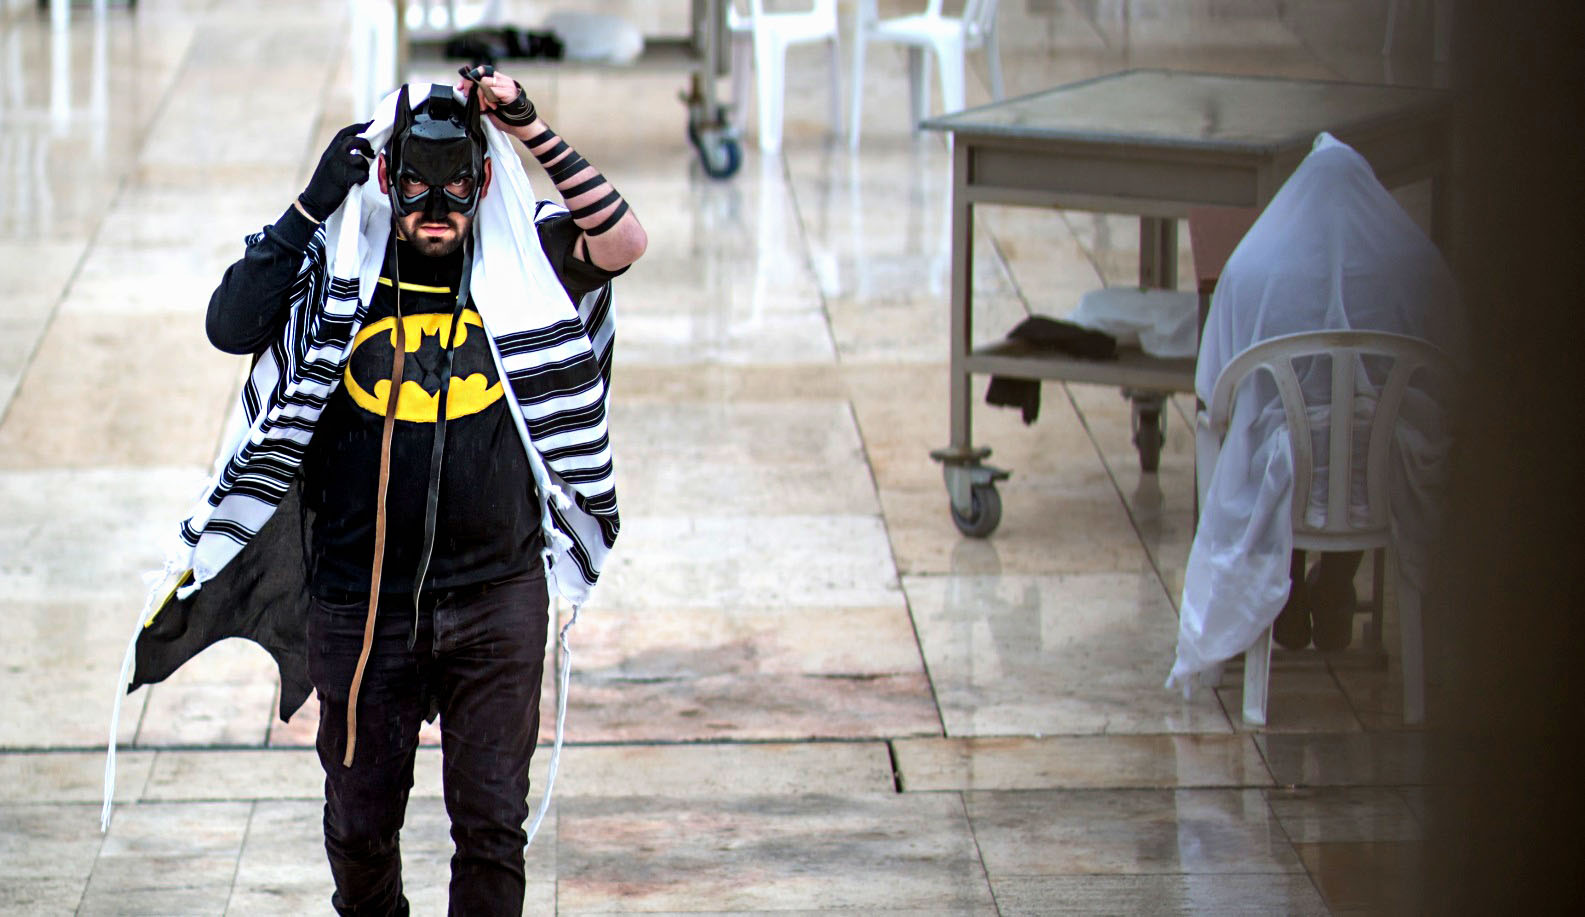 Tal Or-Miller’s “The Jewish Batman” was snapped at the Western Wall.